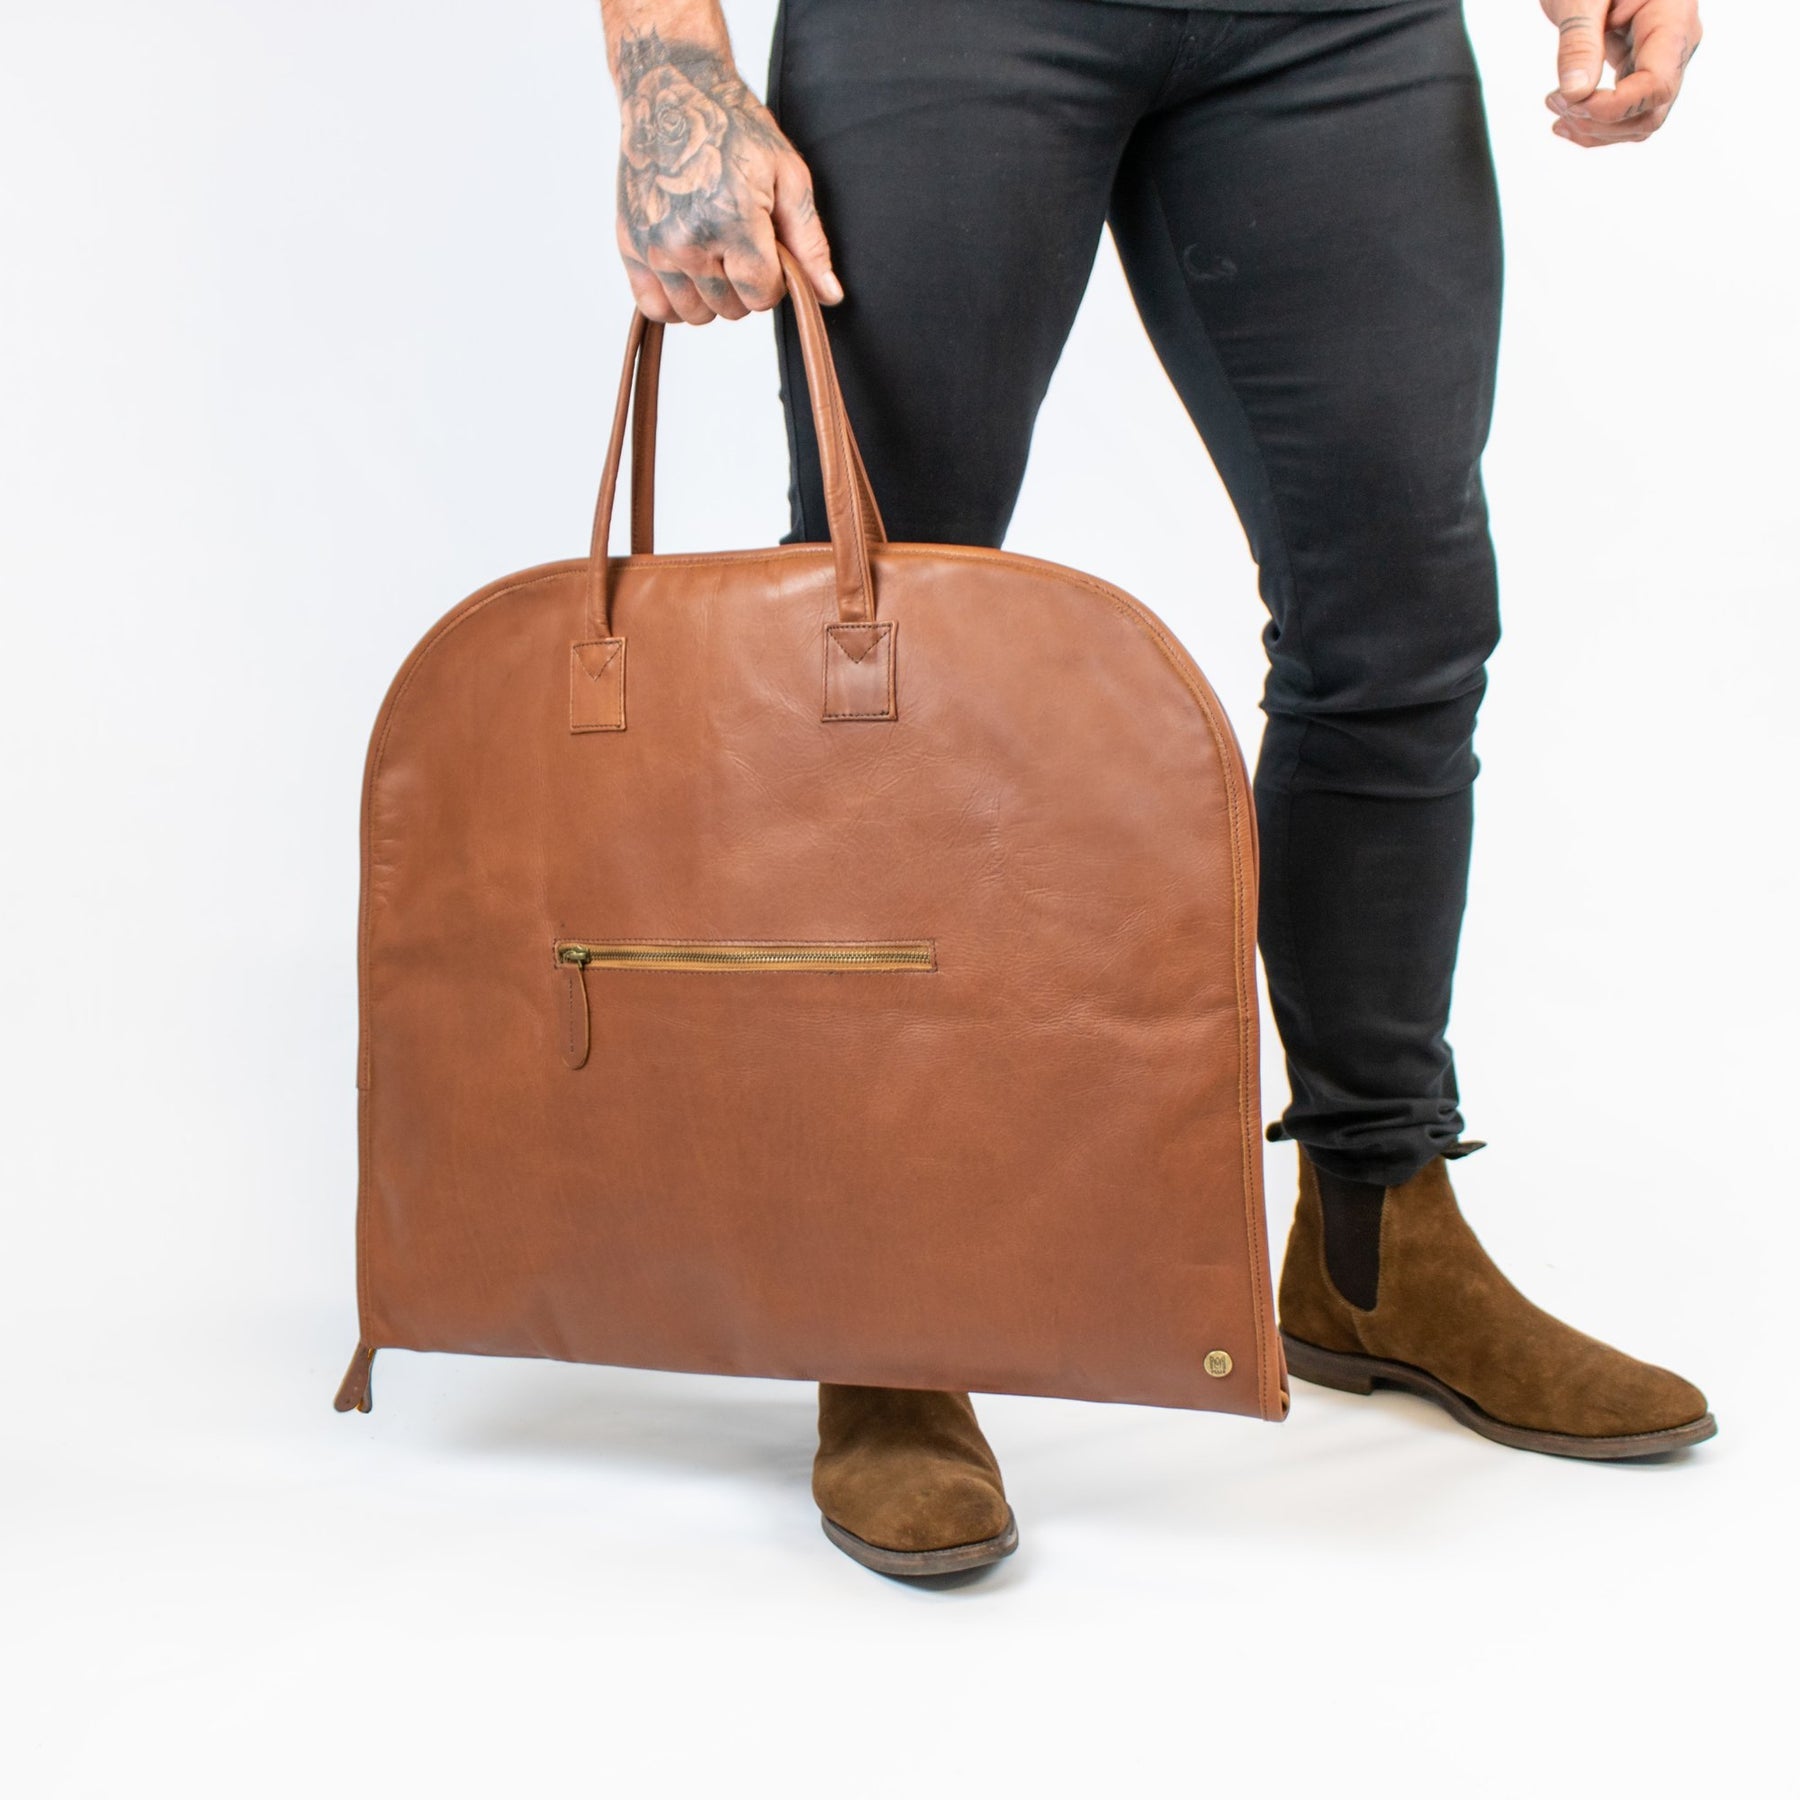 Leather-Canvas Suit Carrier. Dress or Garment Carrier